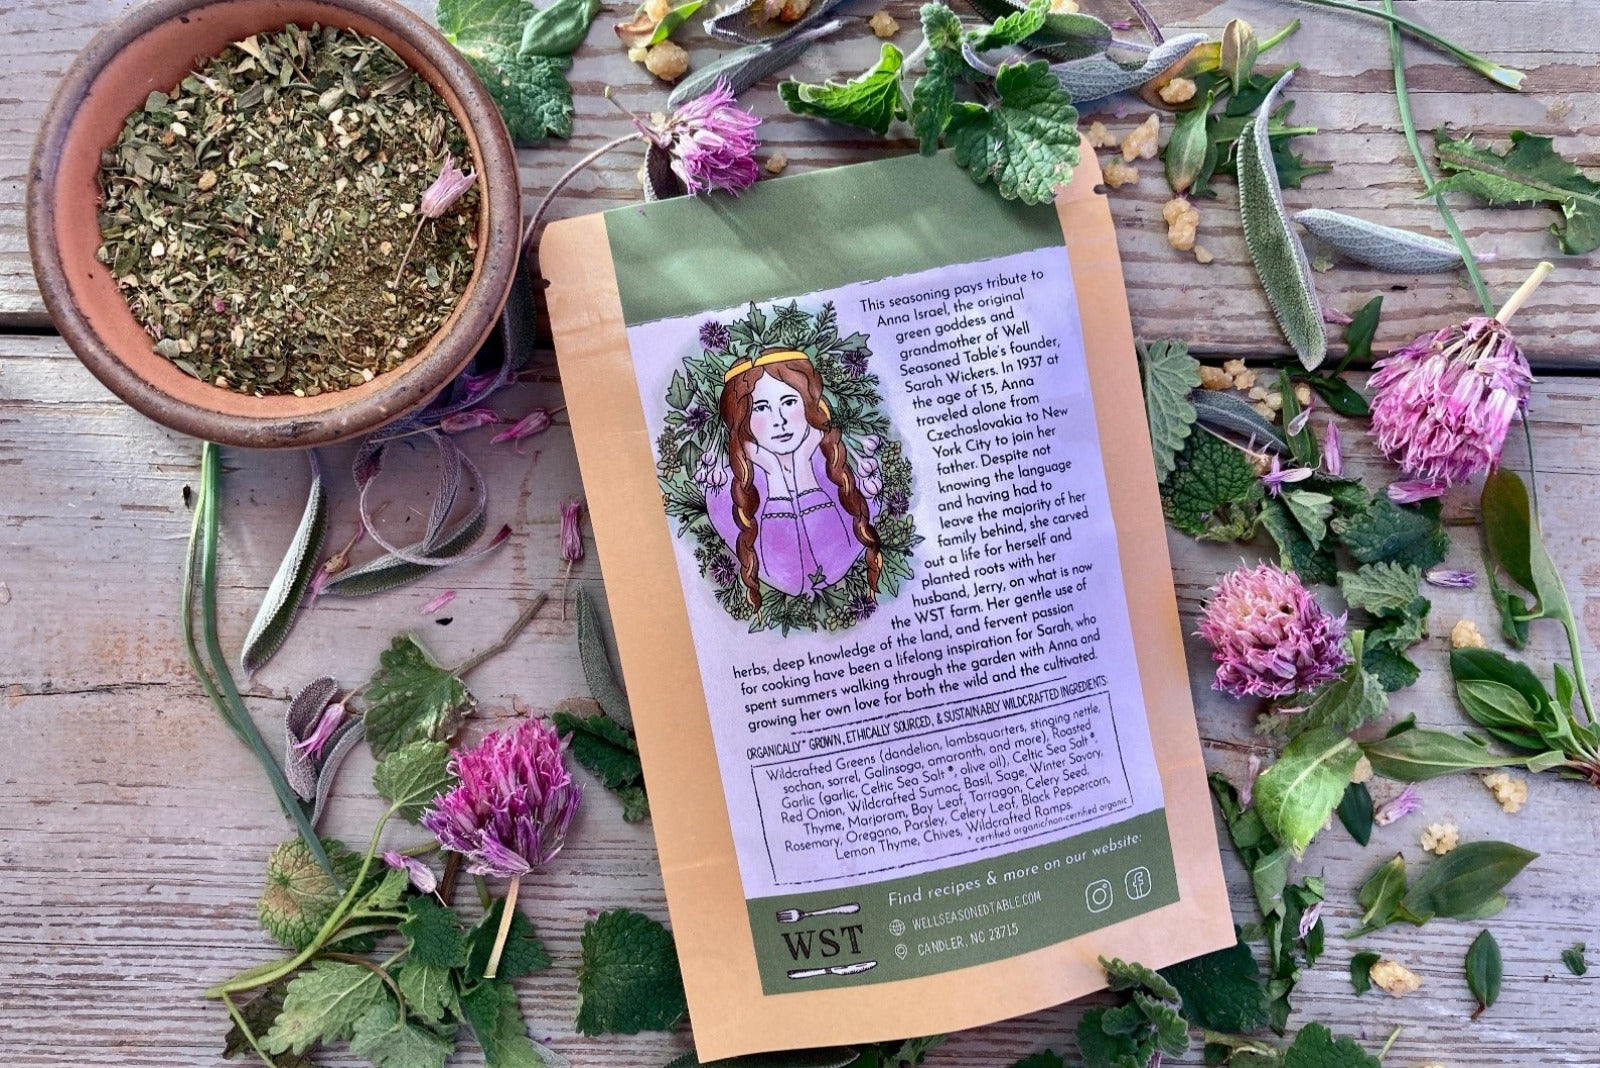 The back of a packet of Wild Green Goddess Seasoning from Well Seasoned Table on a wooden background with wild greens and chive blossoms around it.